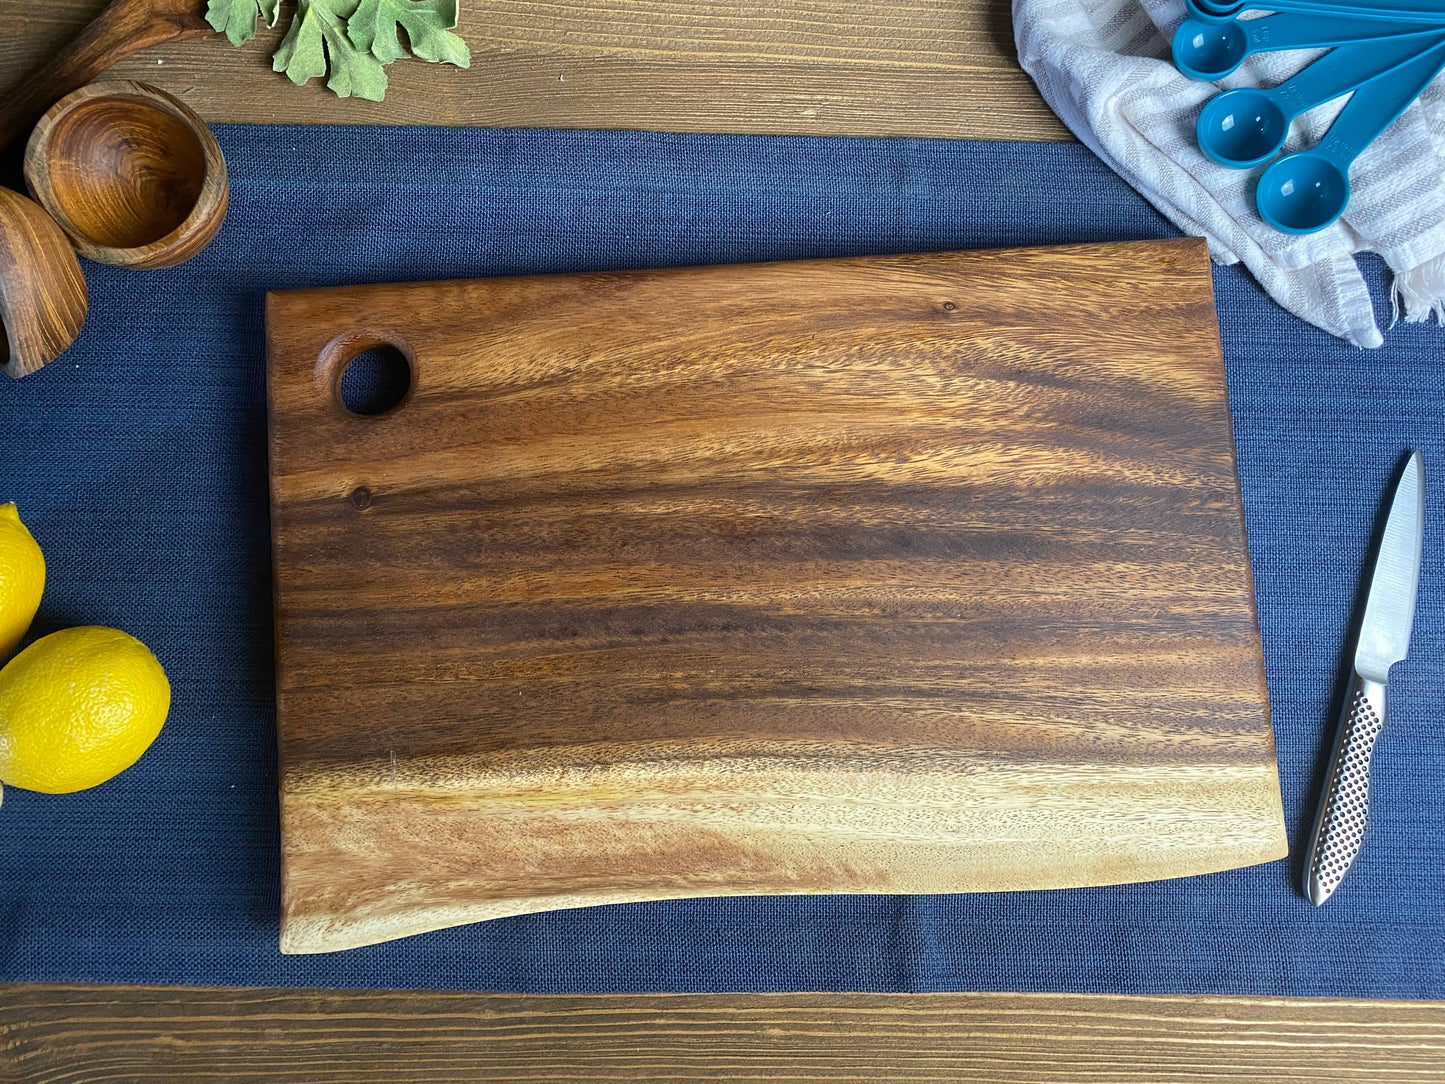 Medium Live Edge Square End Board with Hanging Hole